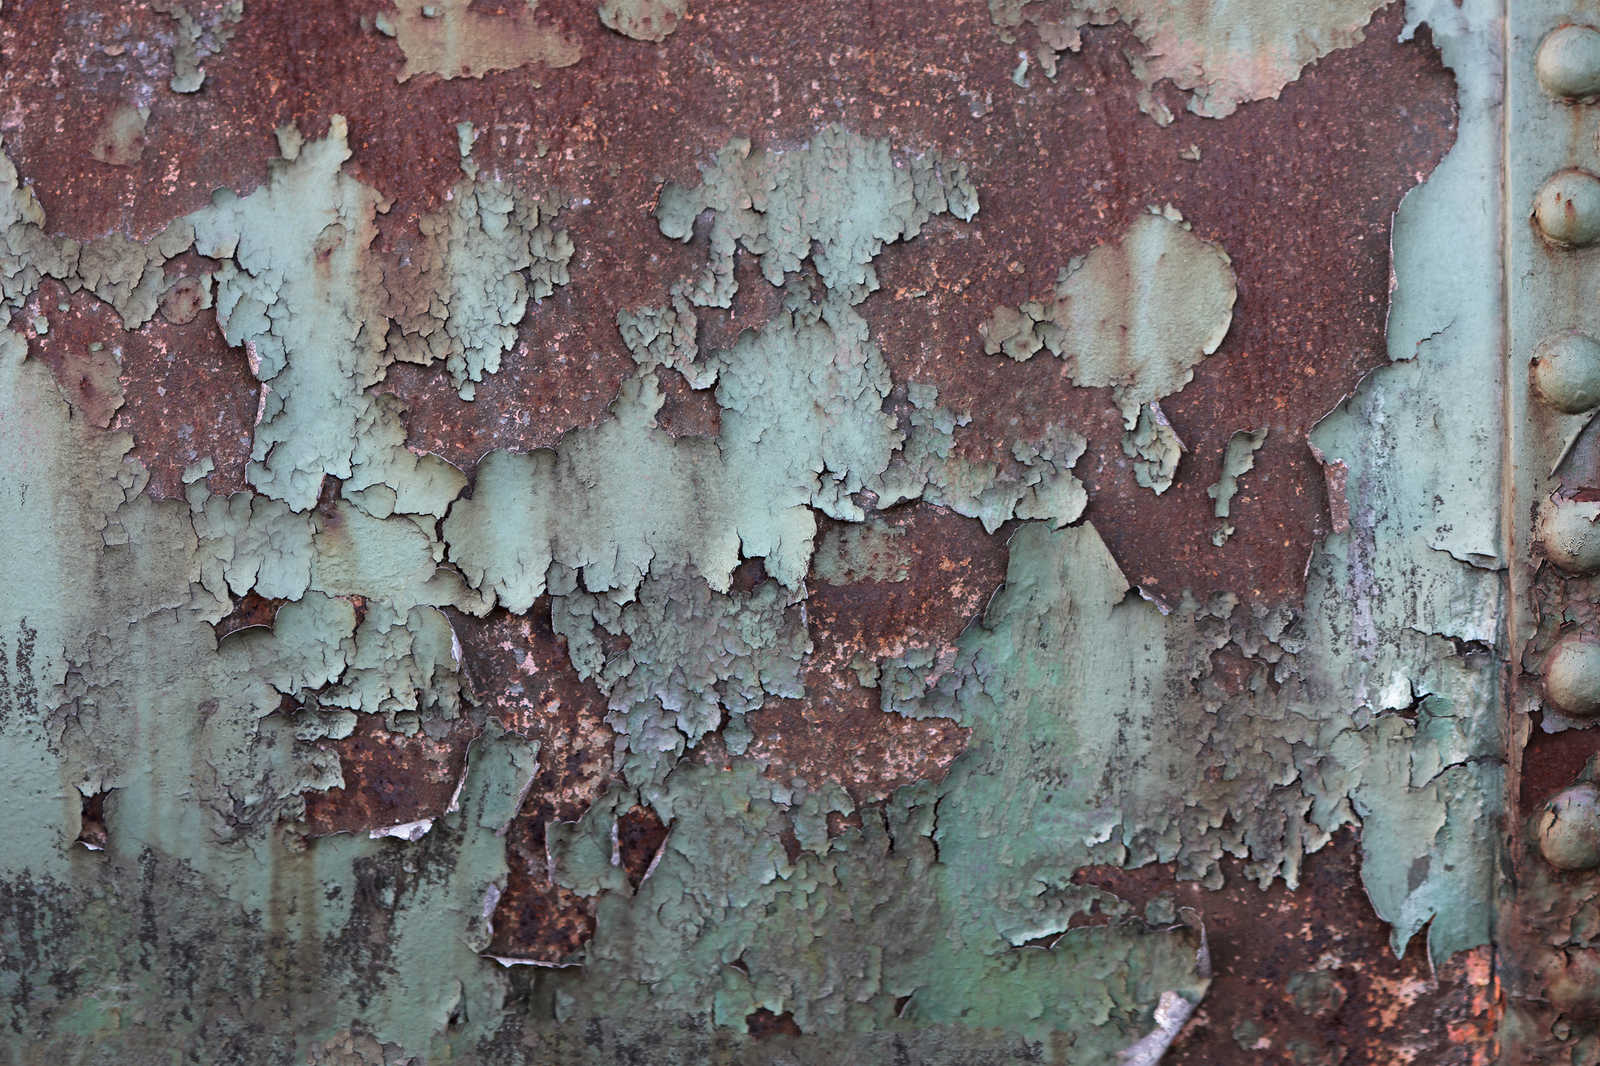             Canvas painting corroding ship's wall - metal plate with rust - 1.20 m x 0.80 m
        